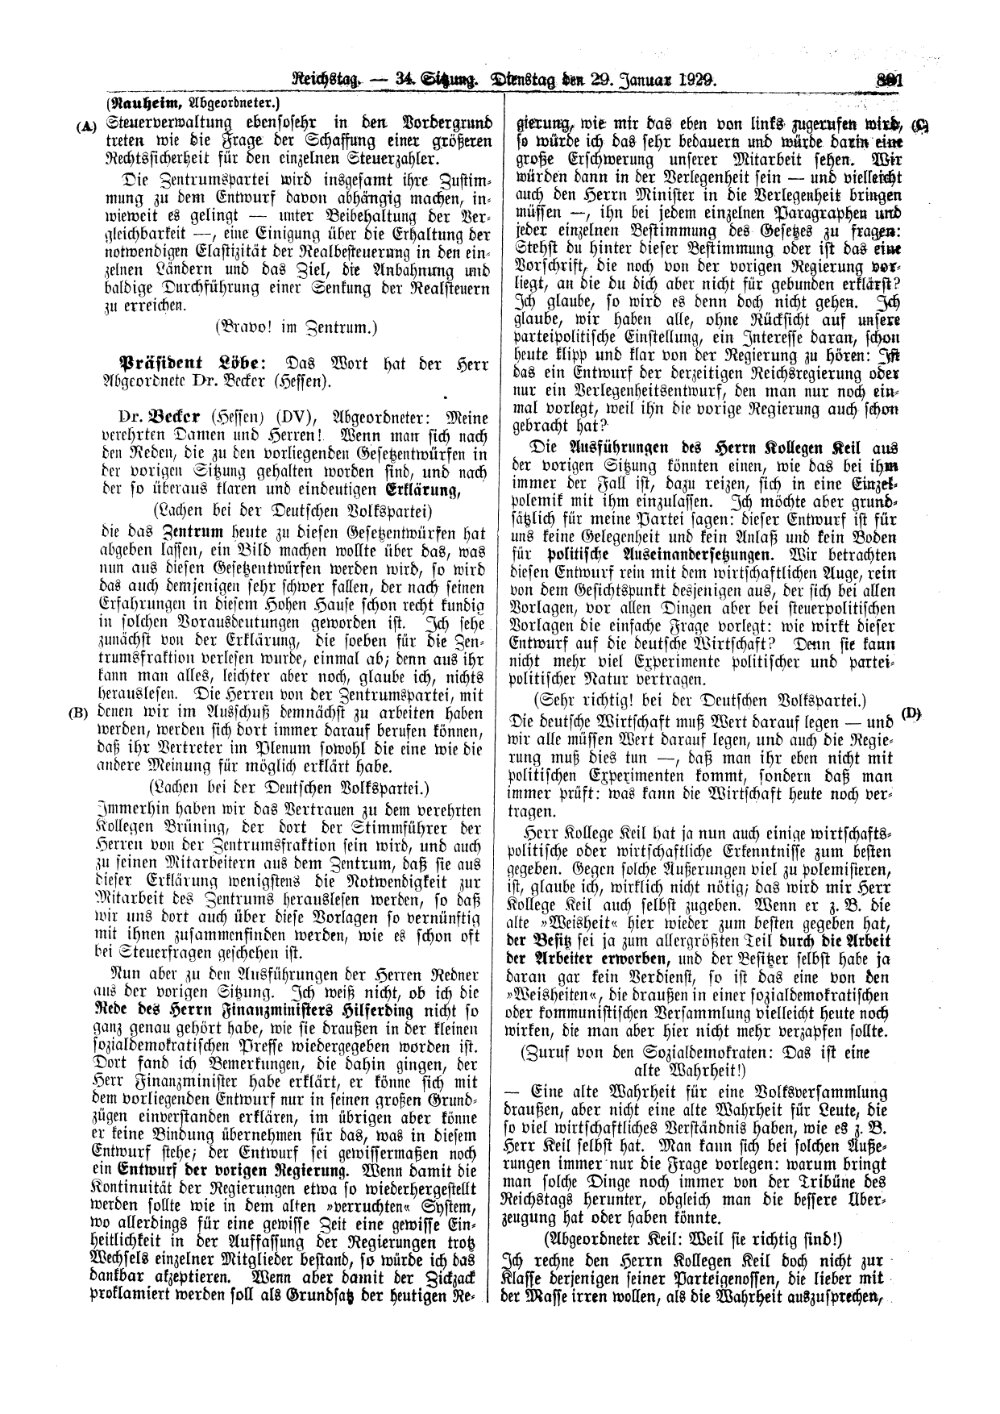 Scan of page 891